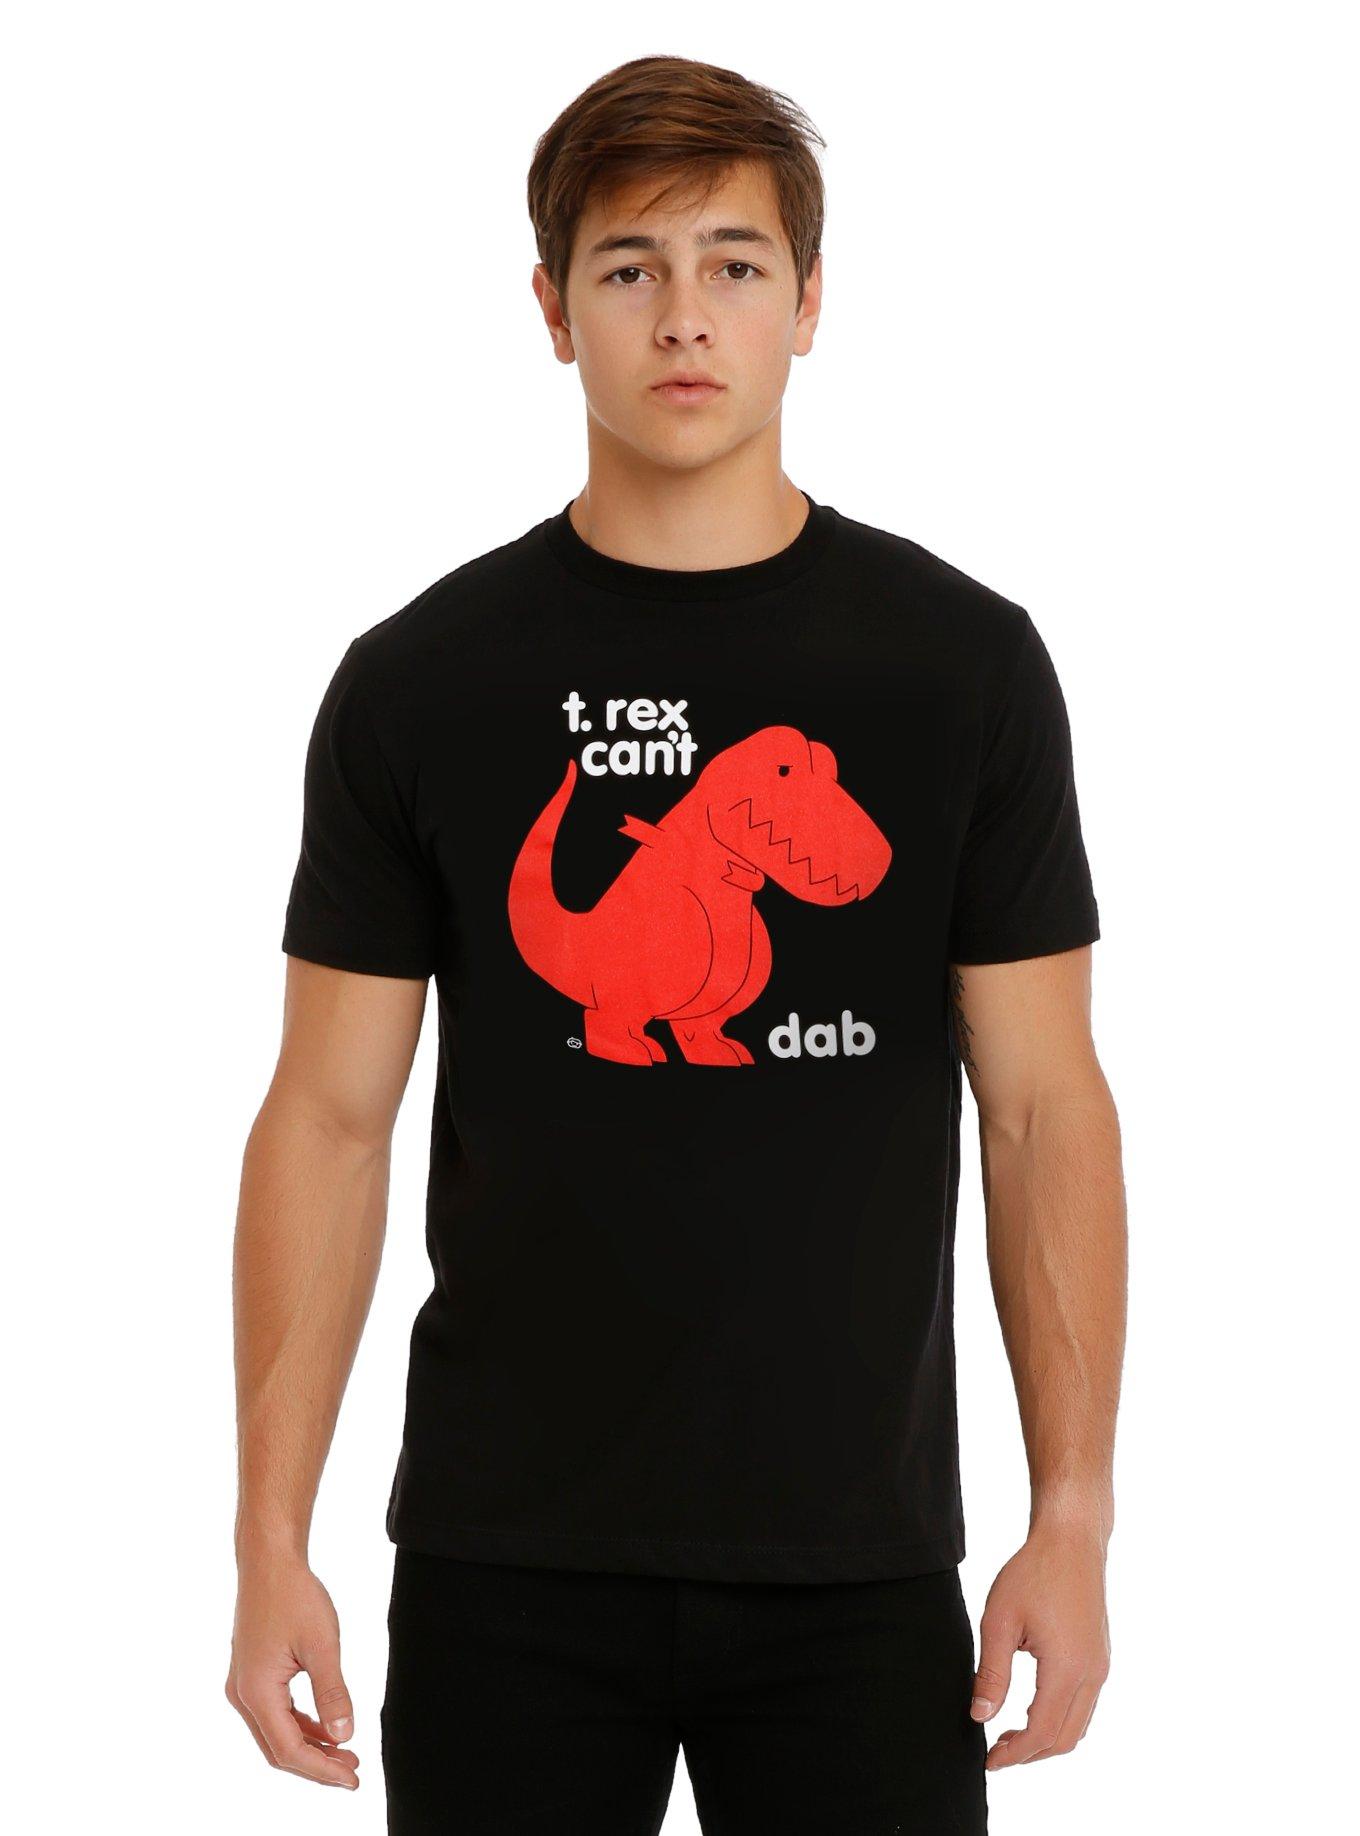 T-Rex Can't Dab T-Shirt | Hot Topic